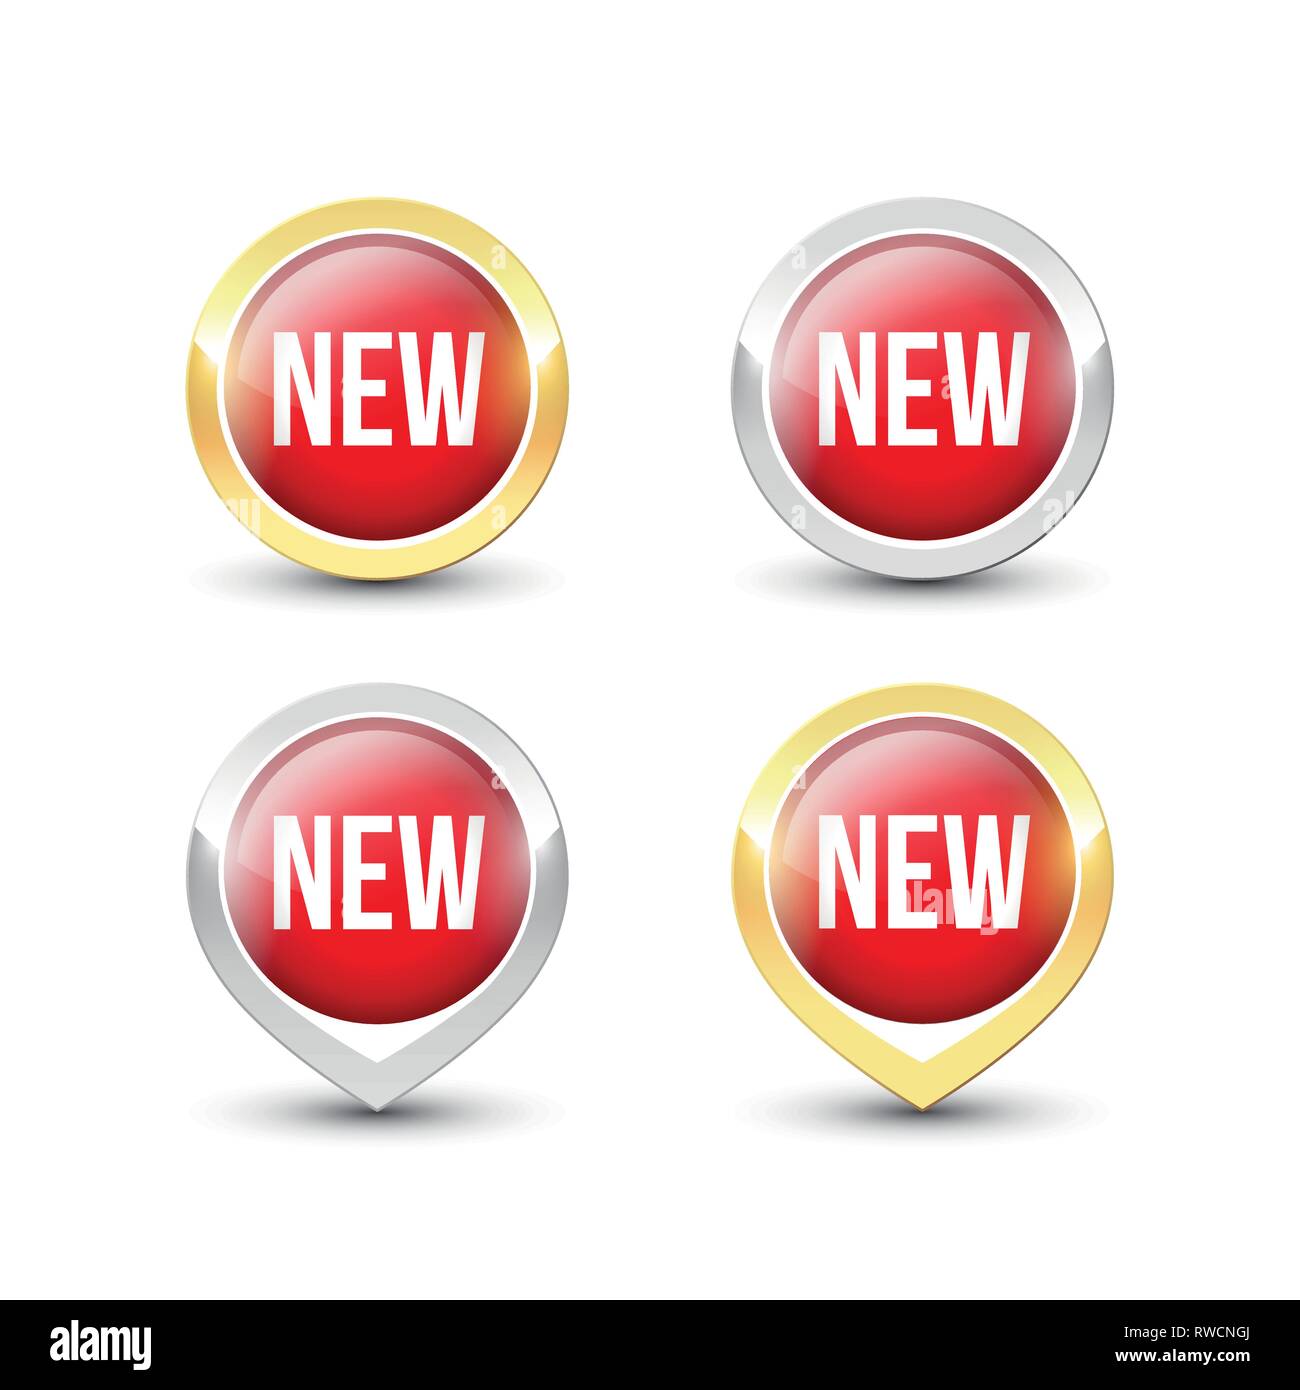 Red round NEW buttons and pointers with metallic gold and silver border. Vector label icons isolated on white background. Stock Vector